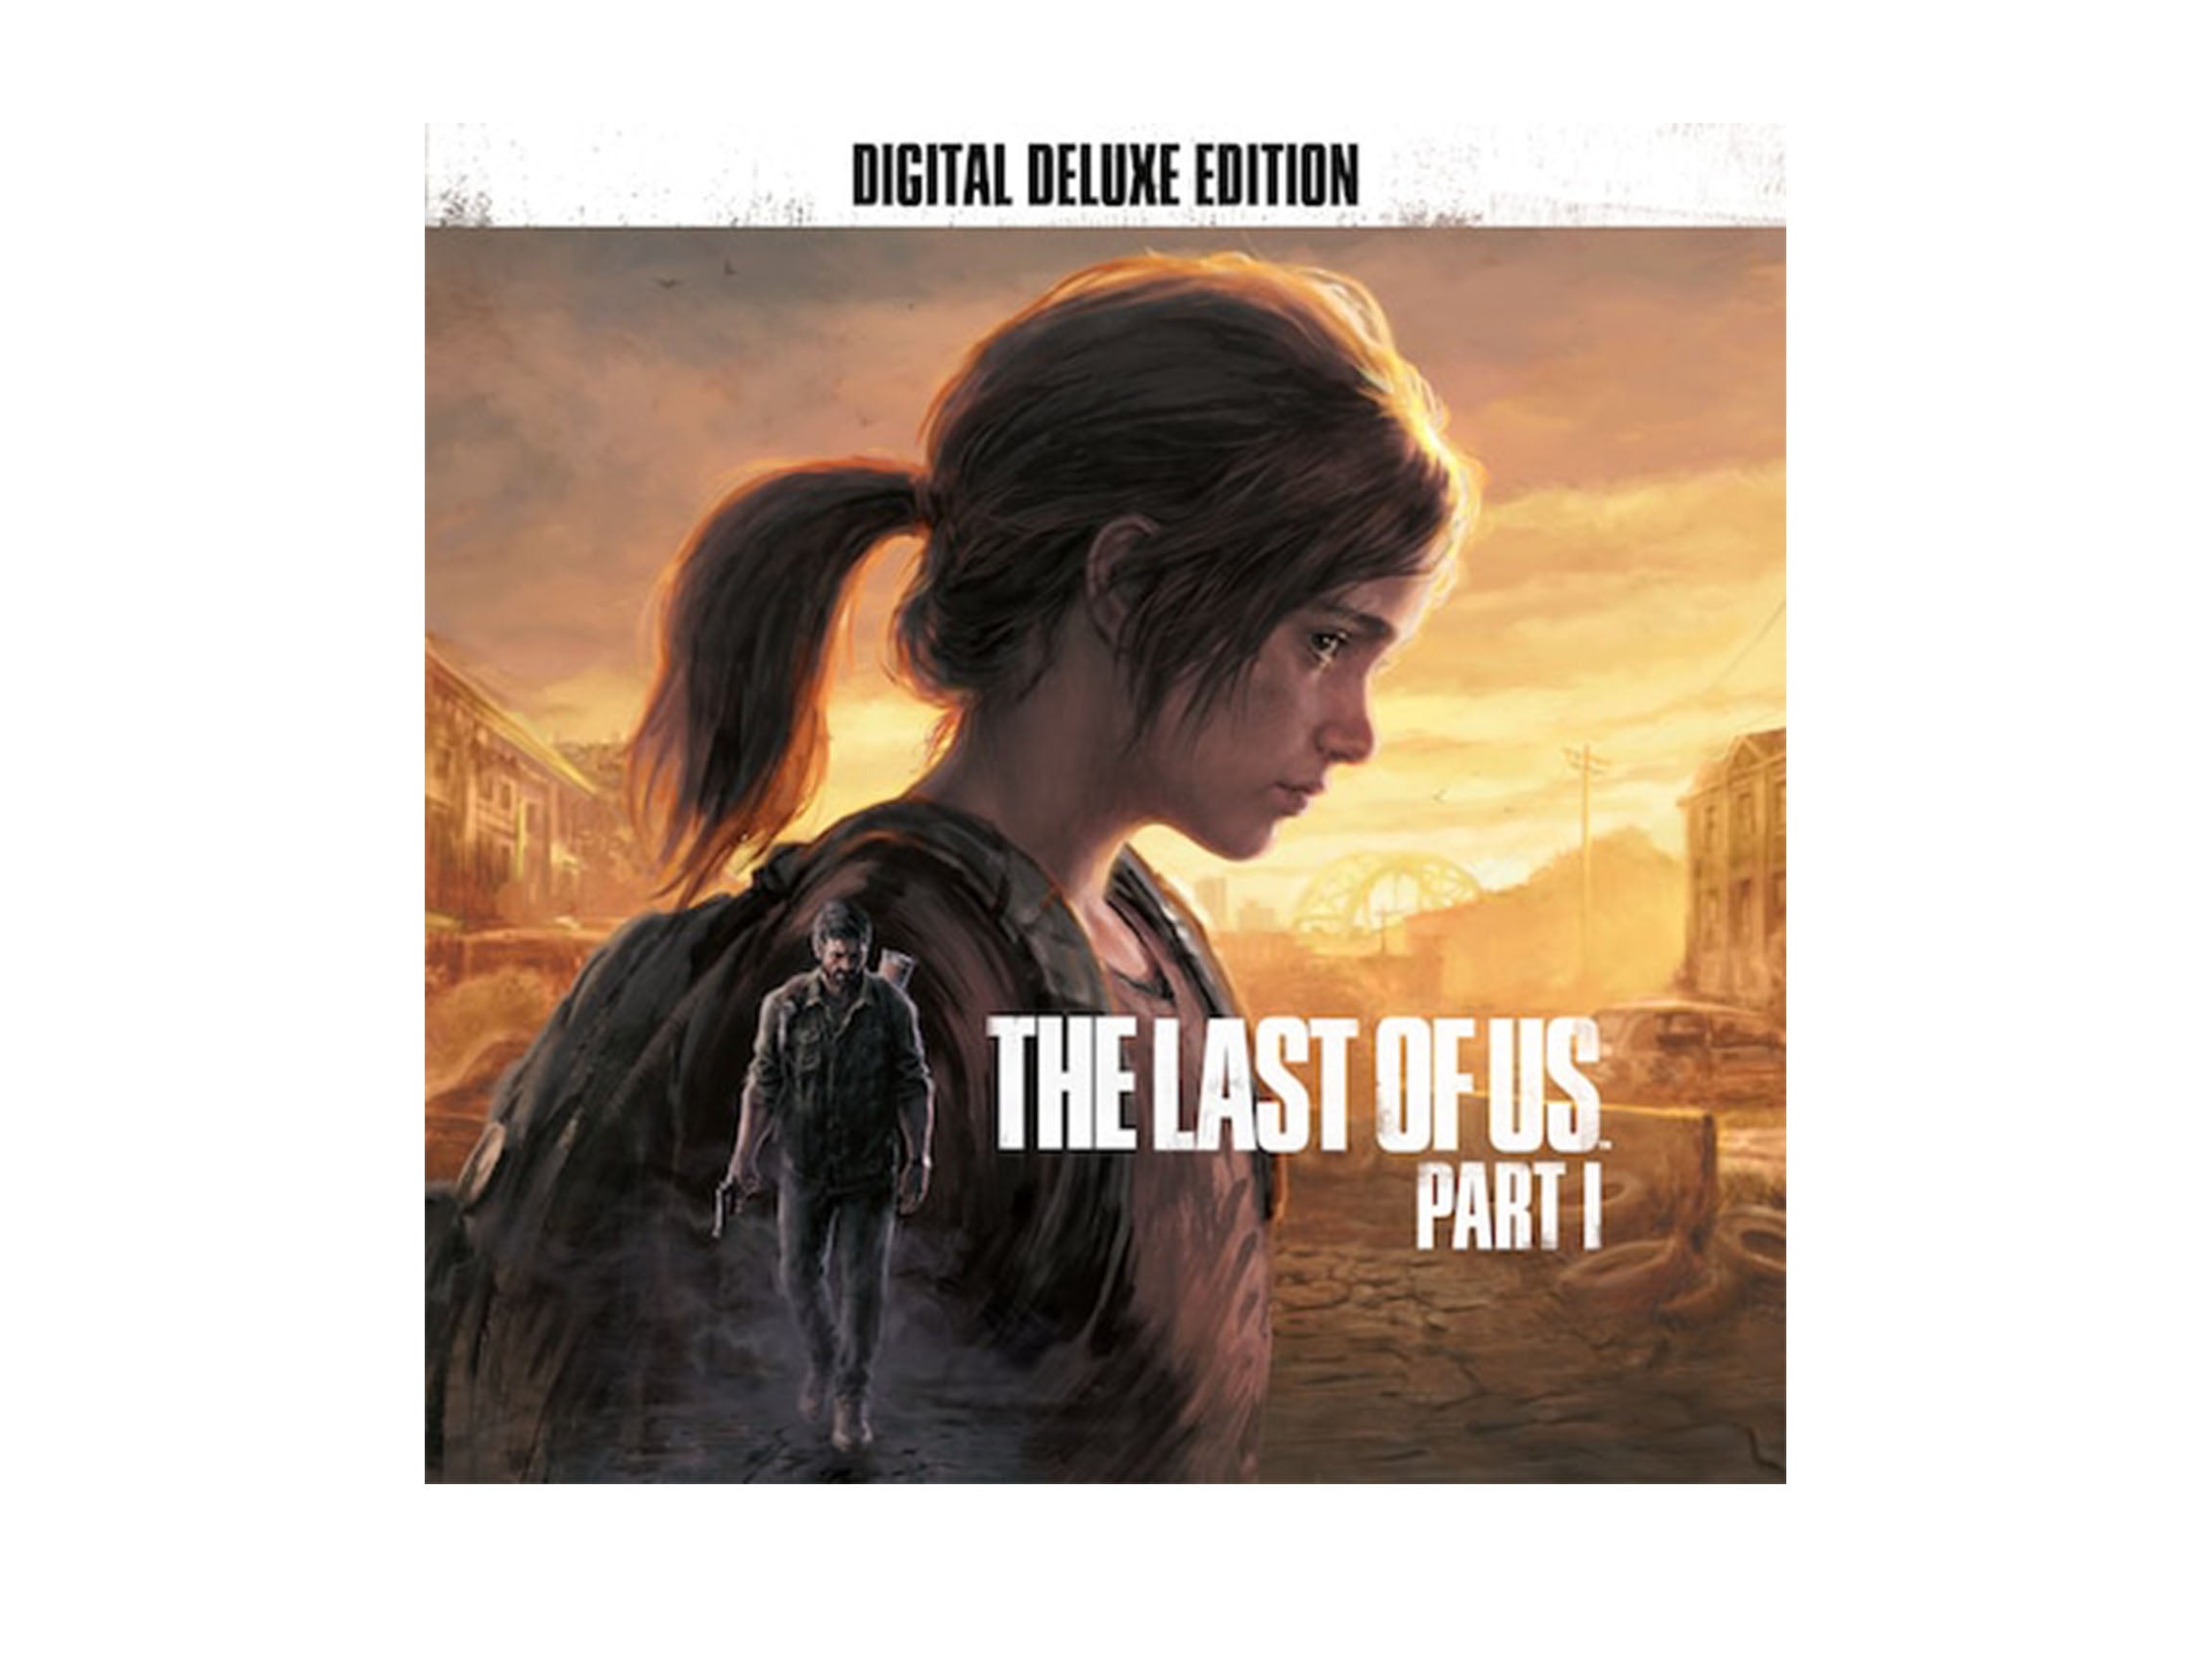 The Last of us Part 1 Deluxe Edition, Steam, No Key